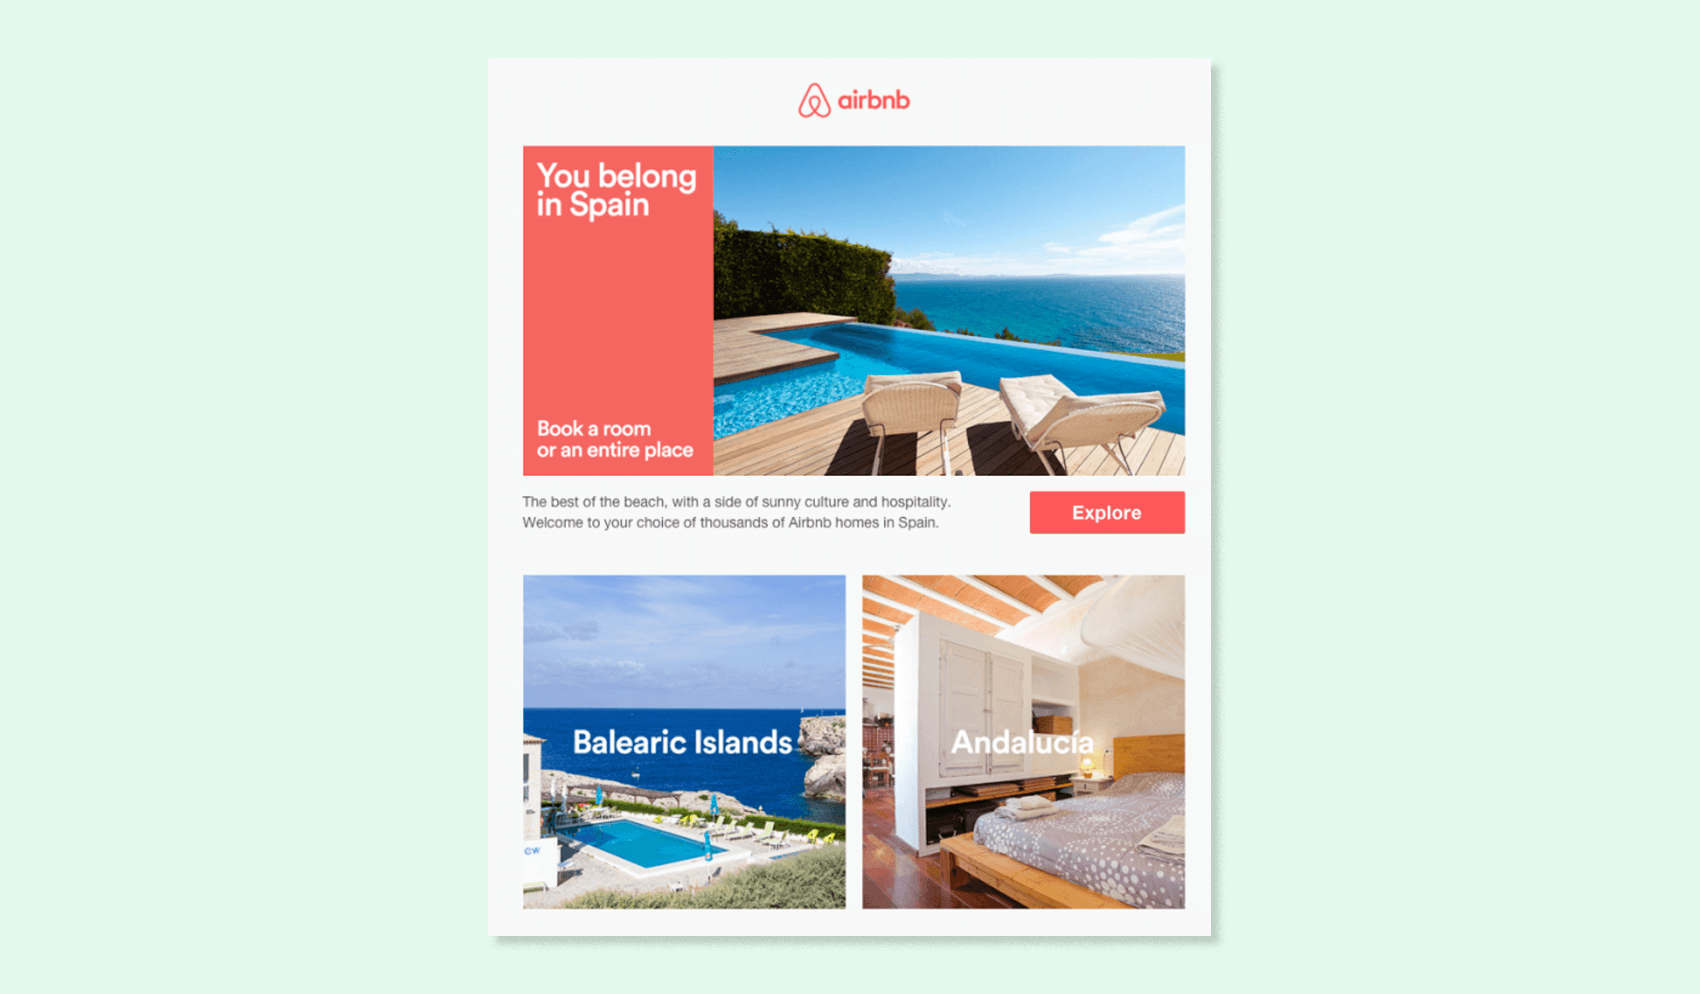 Airbnb subject line